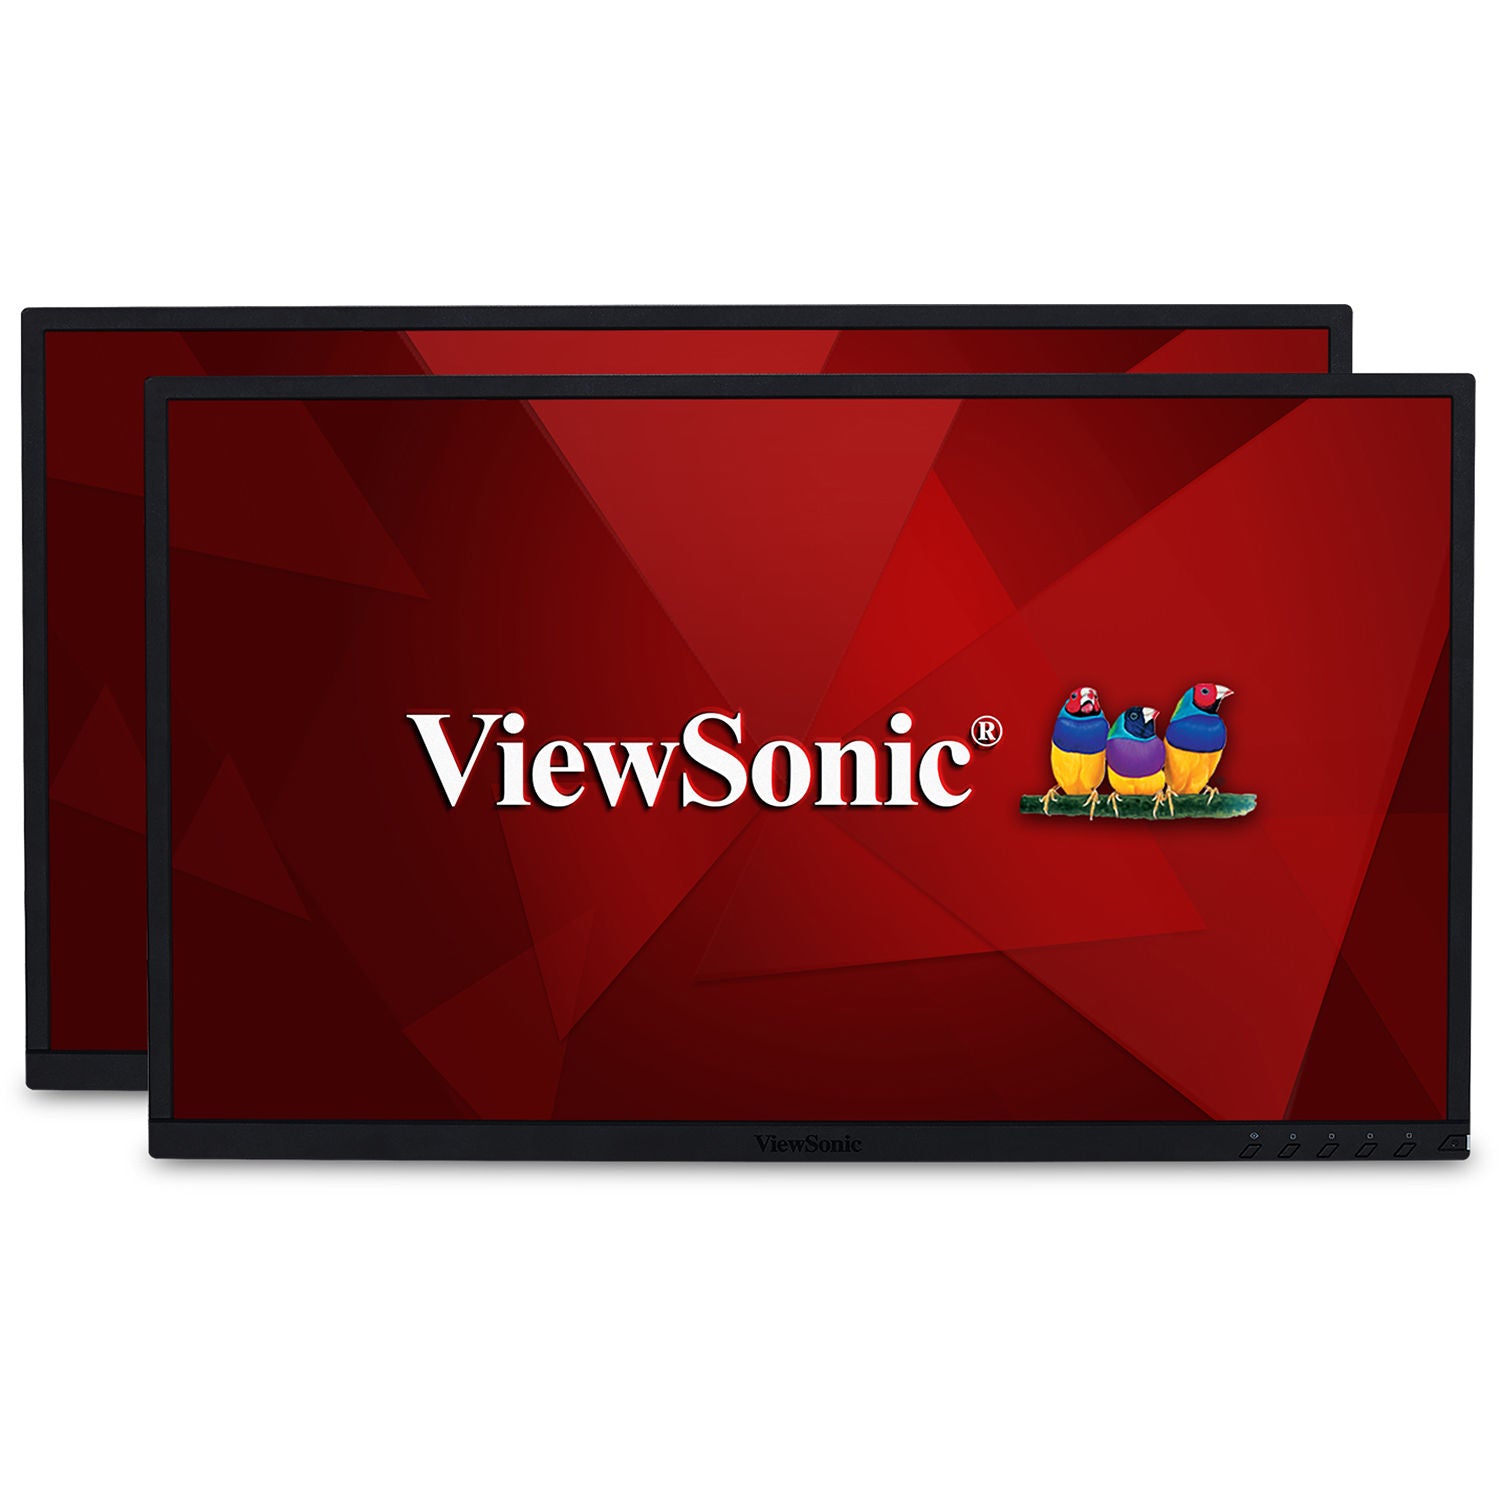 Viewsonic VG2248_H2-R 22" Dual Pack Head-Only 1080p IPS Monitors  - C Grade Refurbished